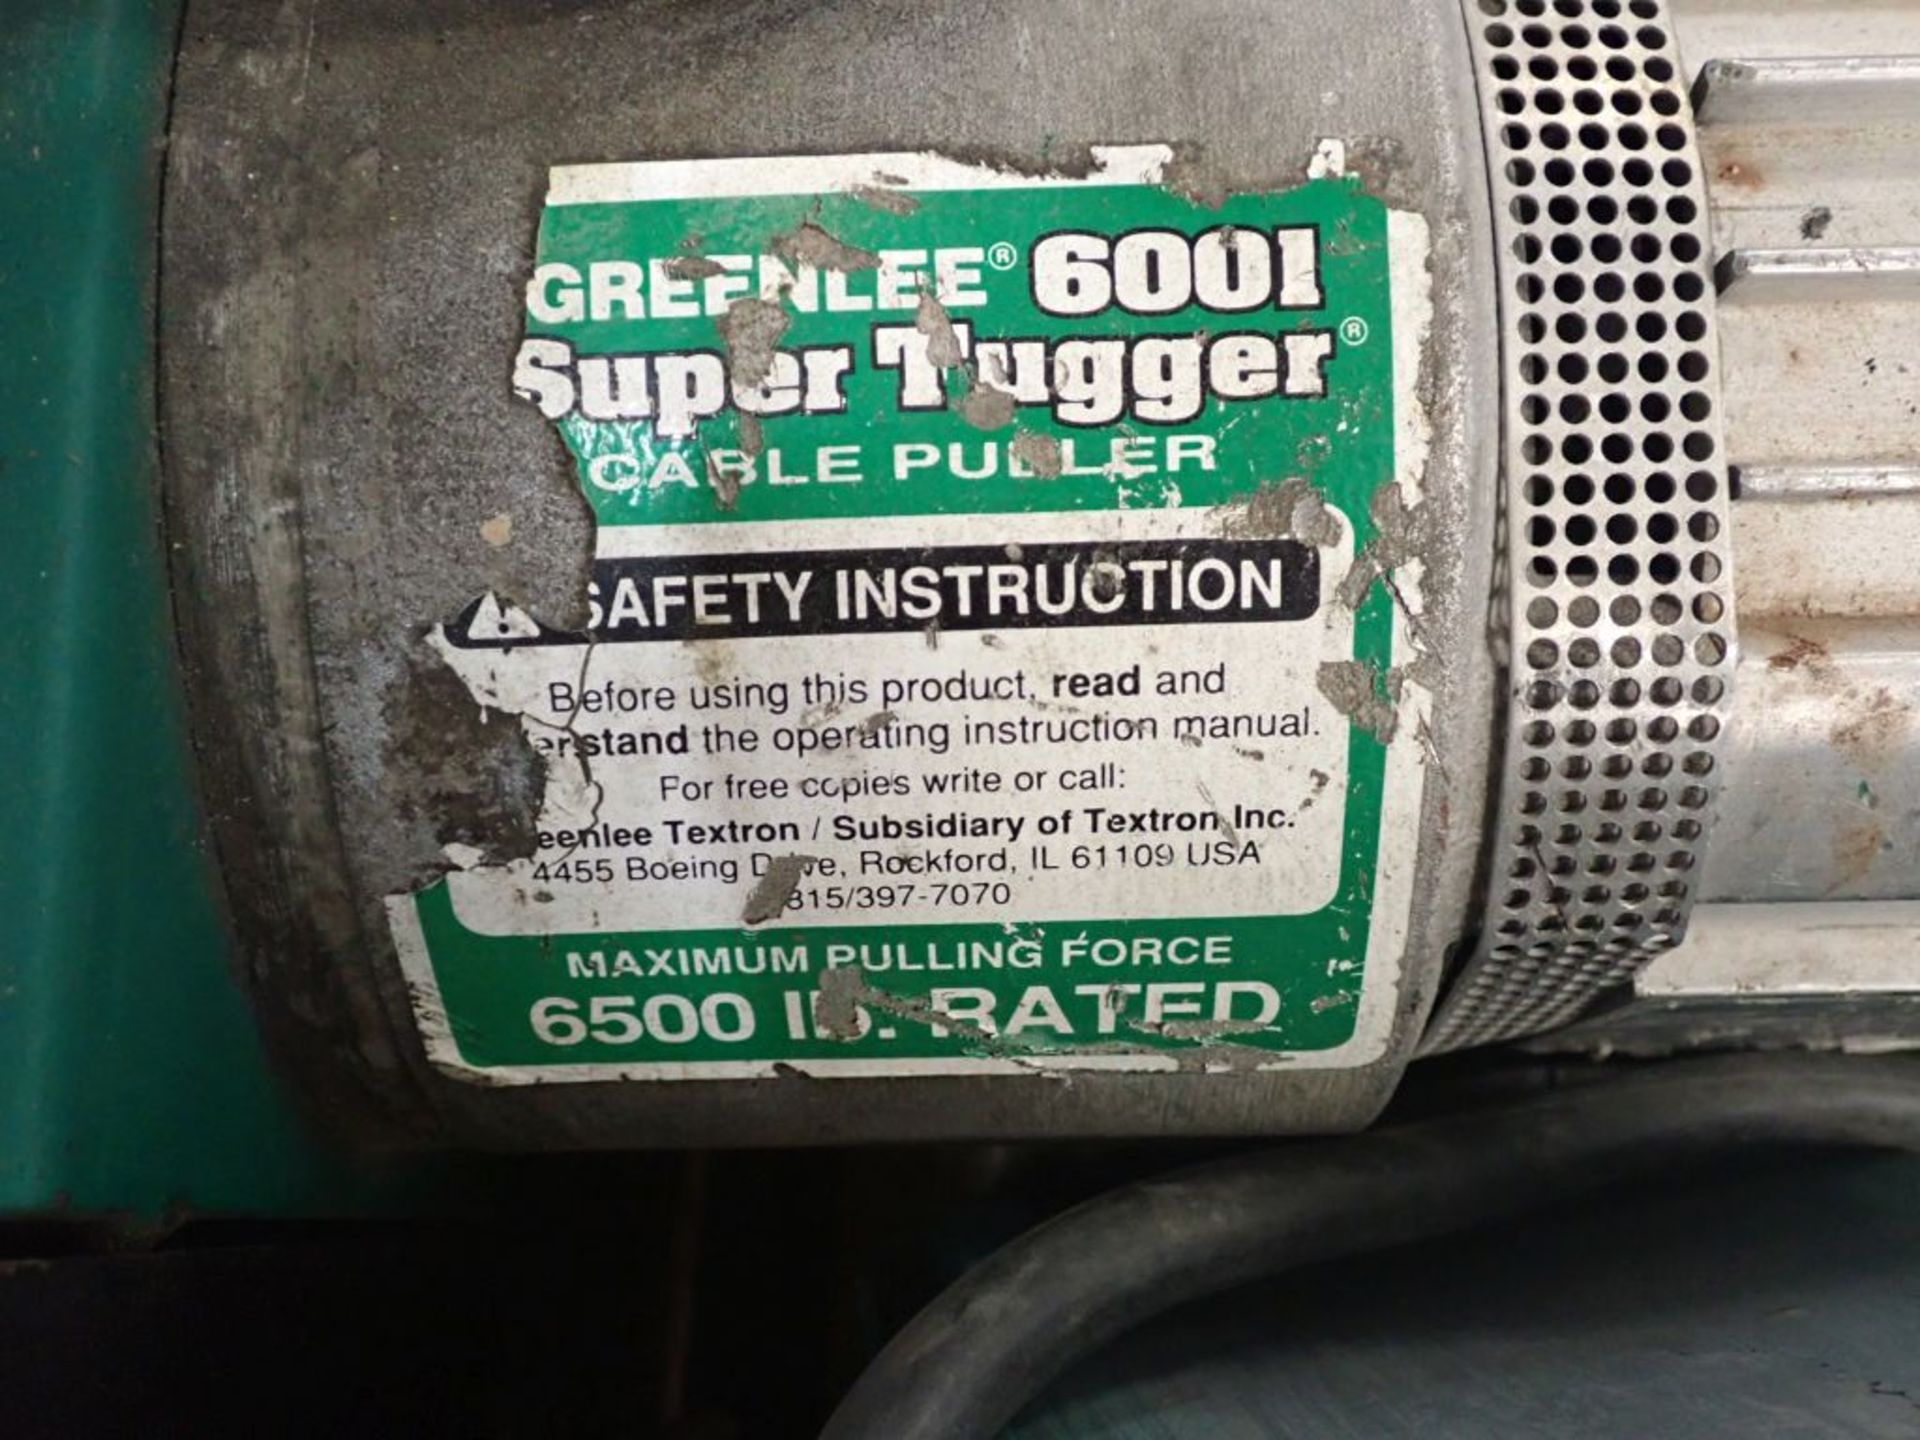 Greenlee Cable Puller 6001 - Image 9 of 13